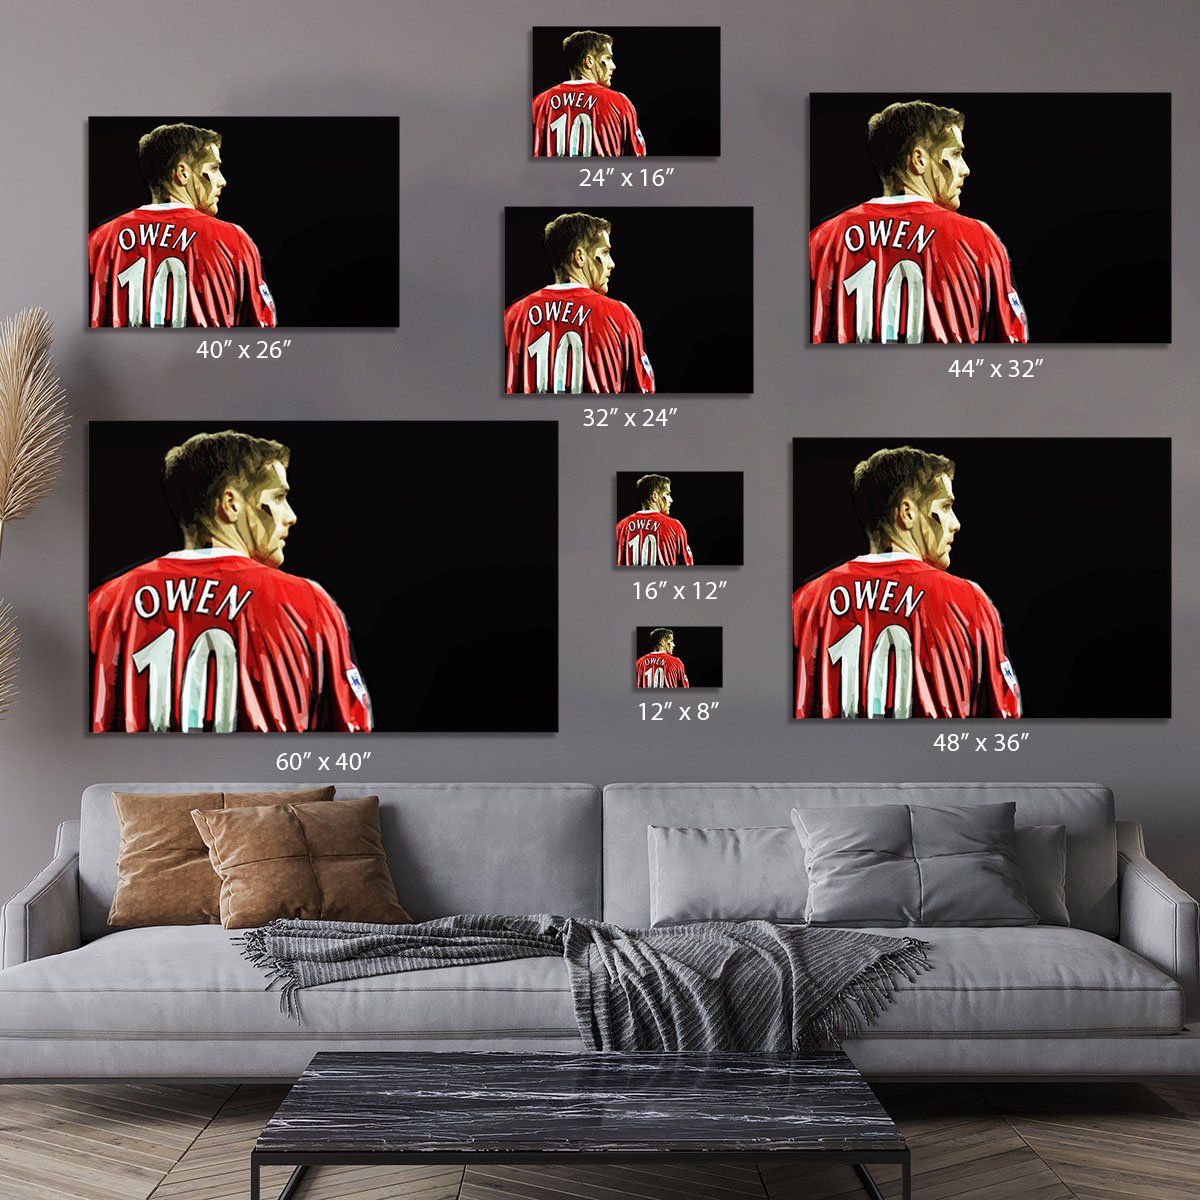 Michael Owen Liverpool Back Canvas Print or Poster